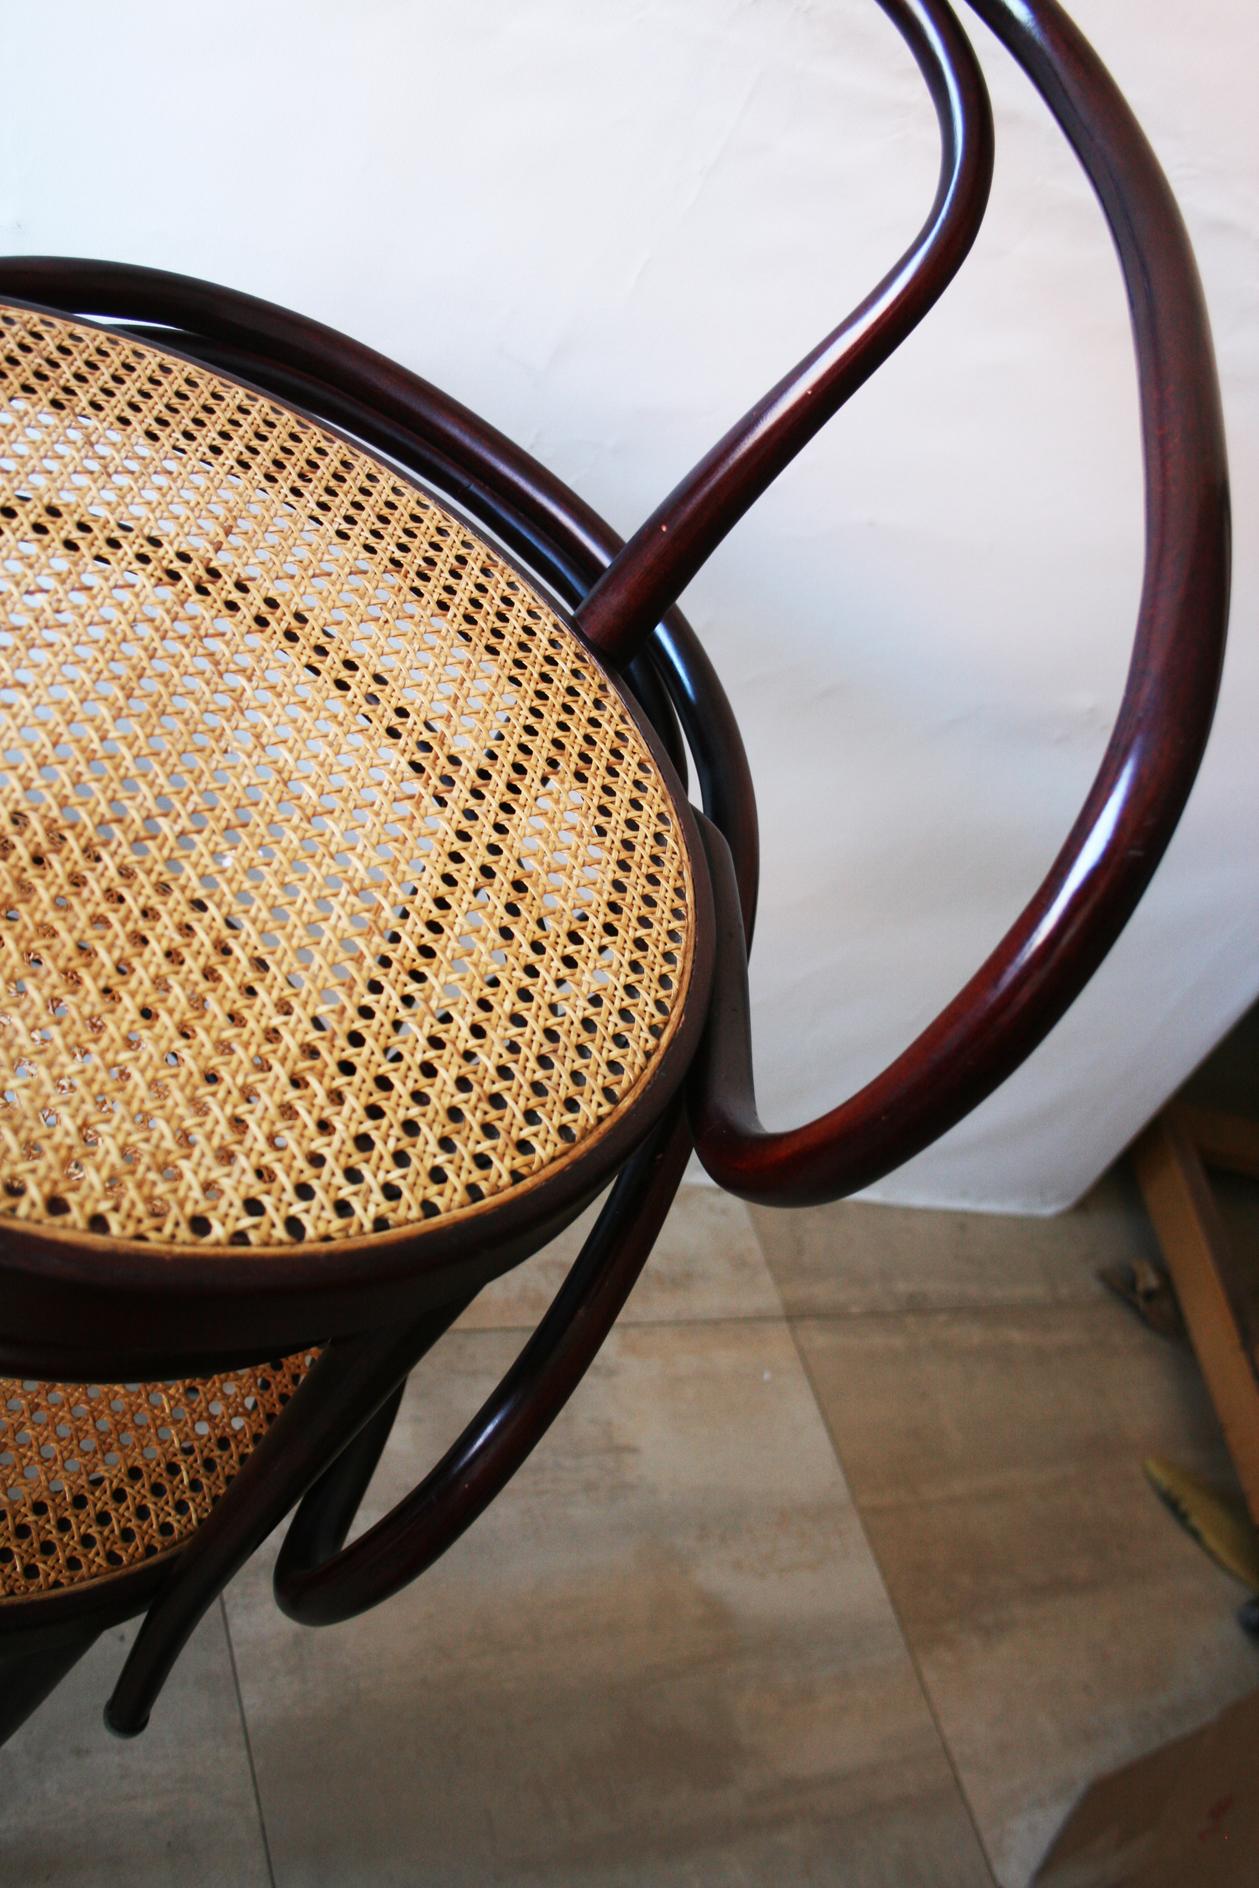 20th Century Pair of Cane and Bentwood Chairs after Thonet 209, 1950s